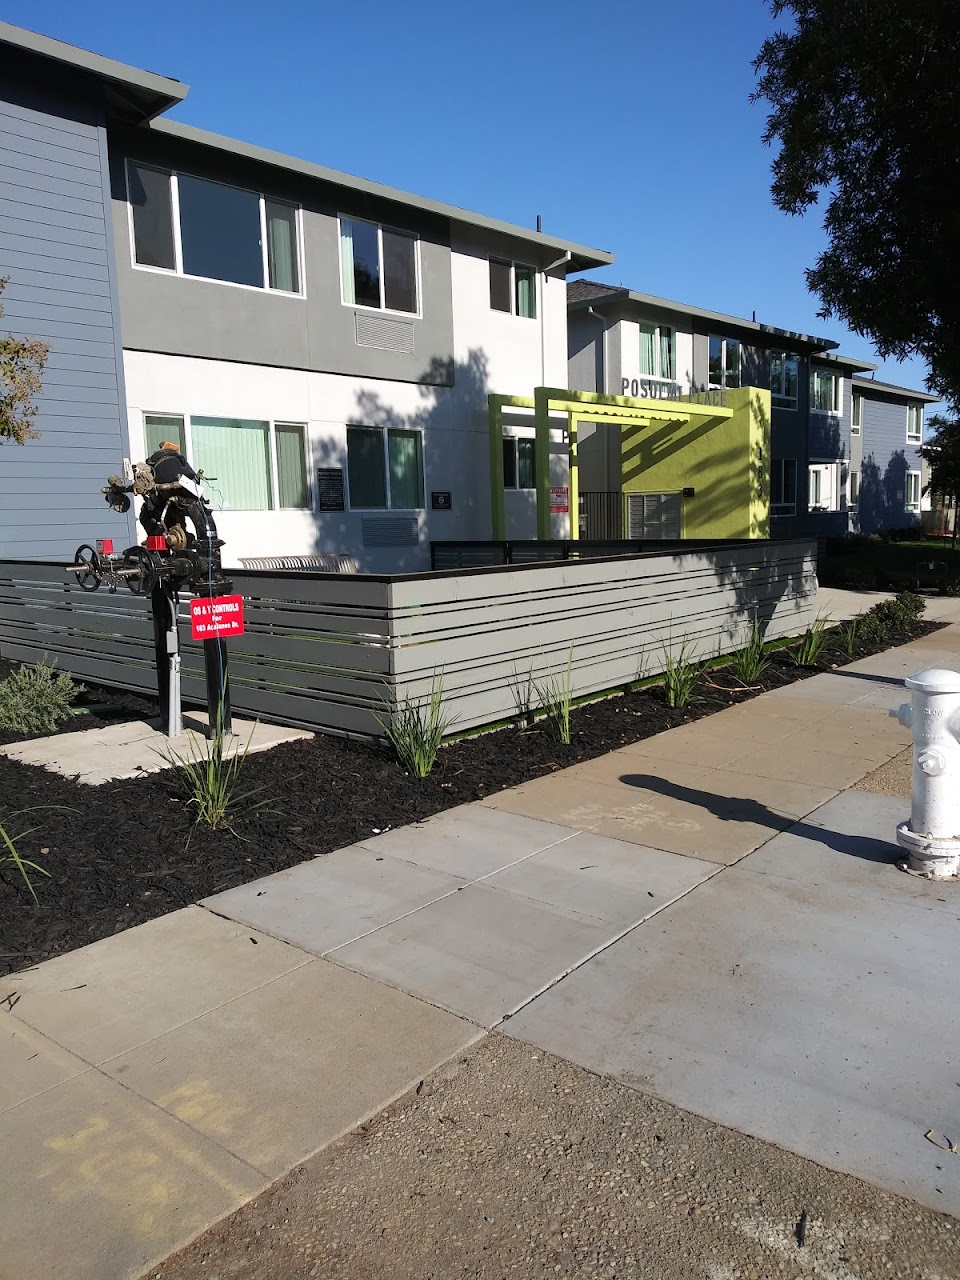 Photo of POSOLMI PLACE (FKA: EIGHT TREES APARTMENTS) at 183 ACALANES DRIVE SUNNYVALE, CA 94086